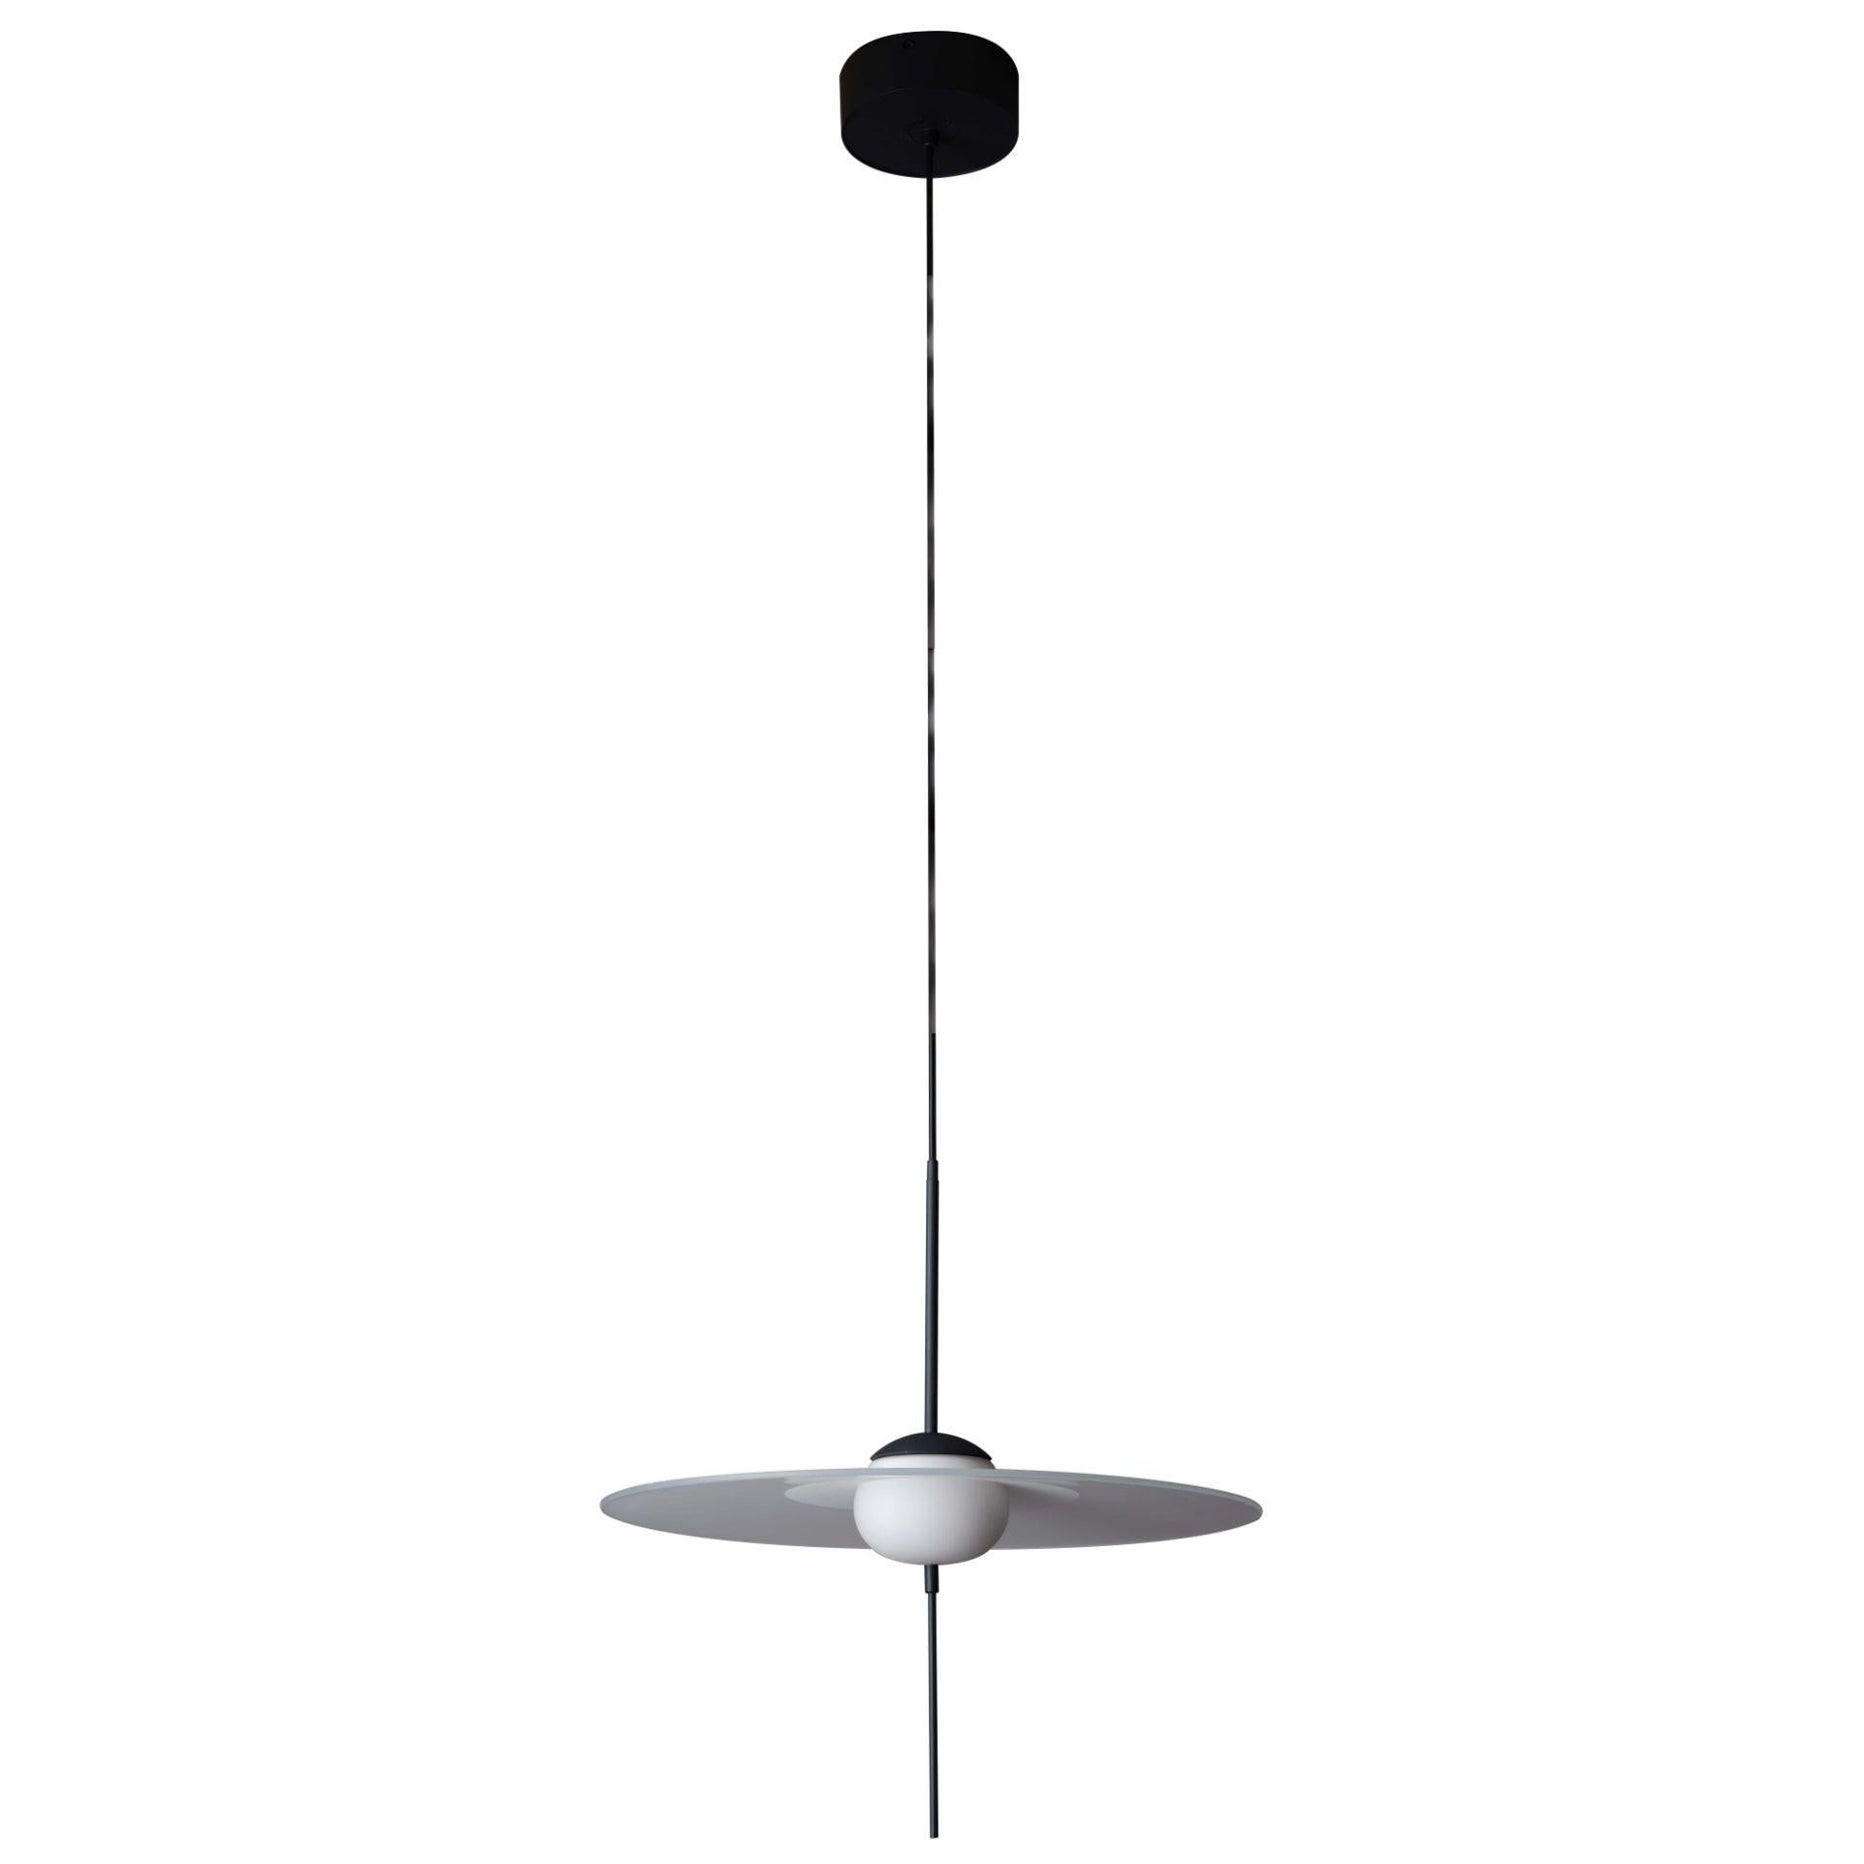 DCW Editions Mono M400 Pendant Lamp in Dark Grey Aluminum and Glass by Vantot For Sale